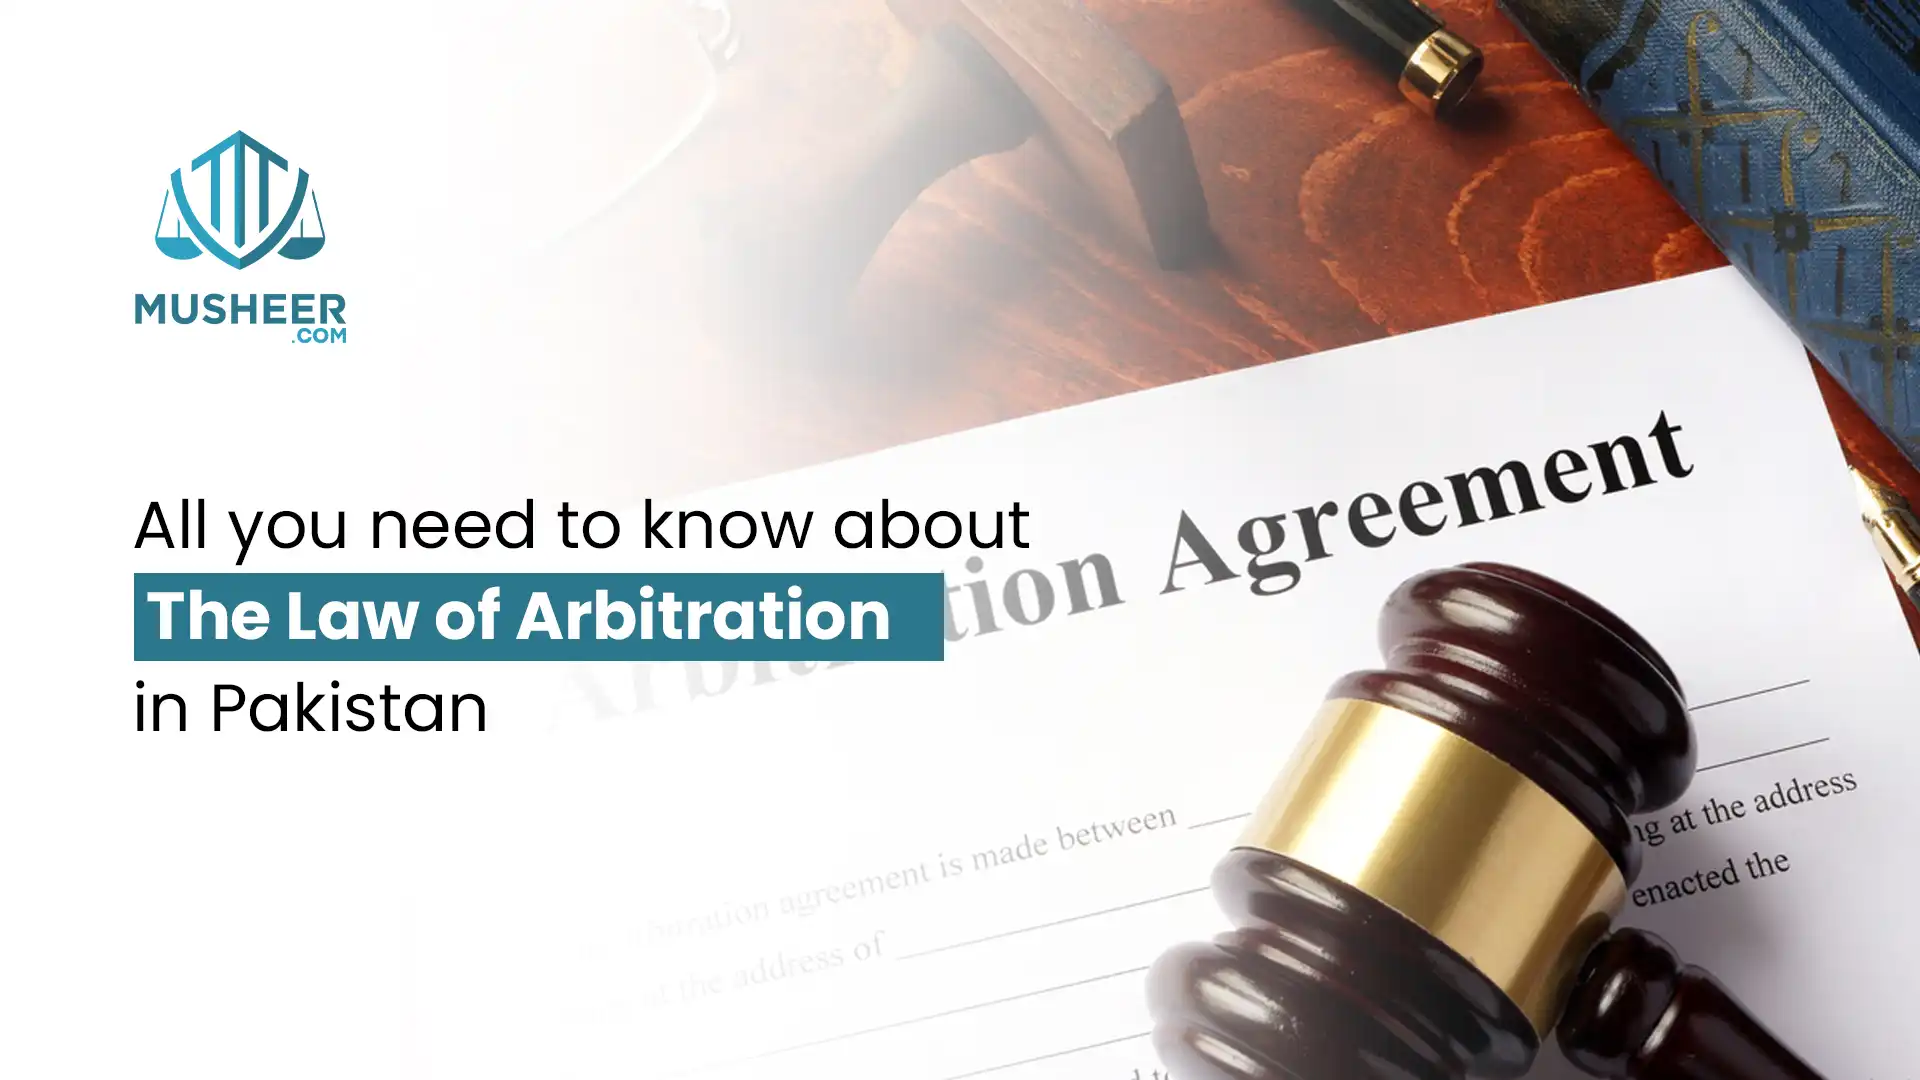 All You Need to Know About the Law of Arbitration in Pakistan